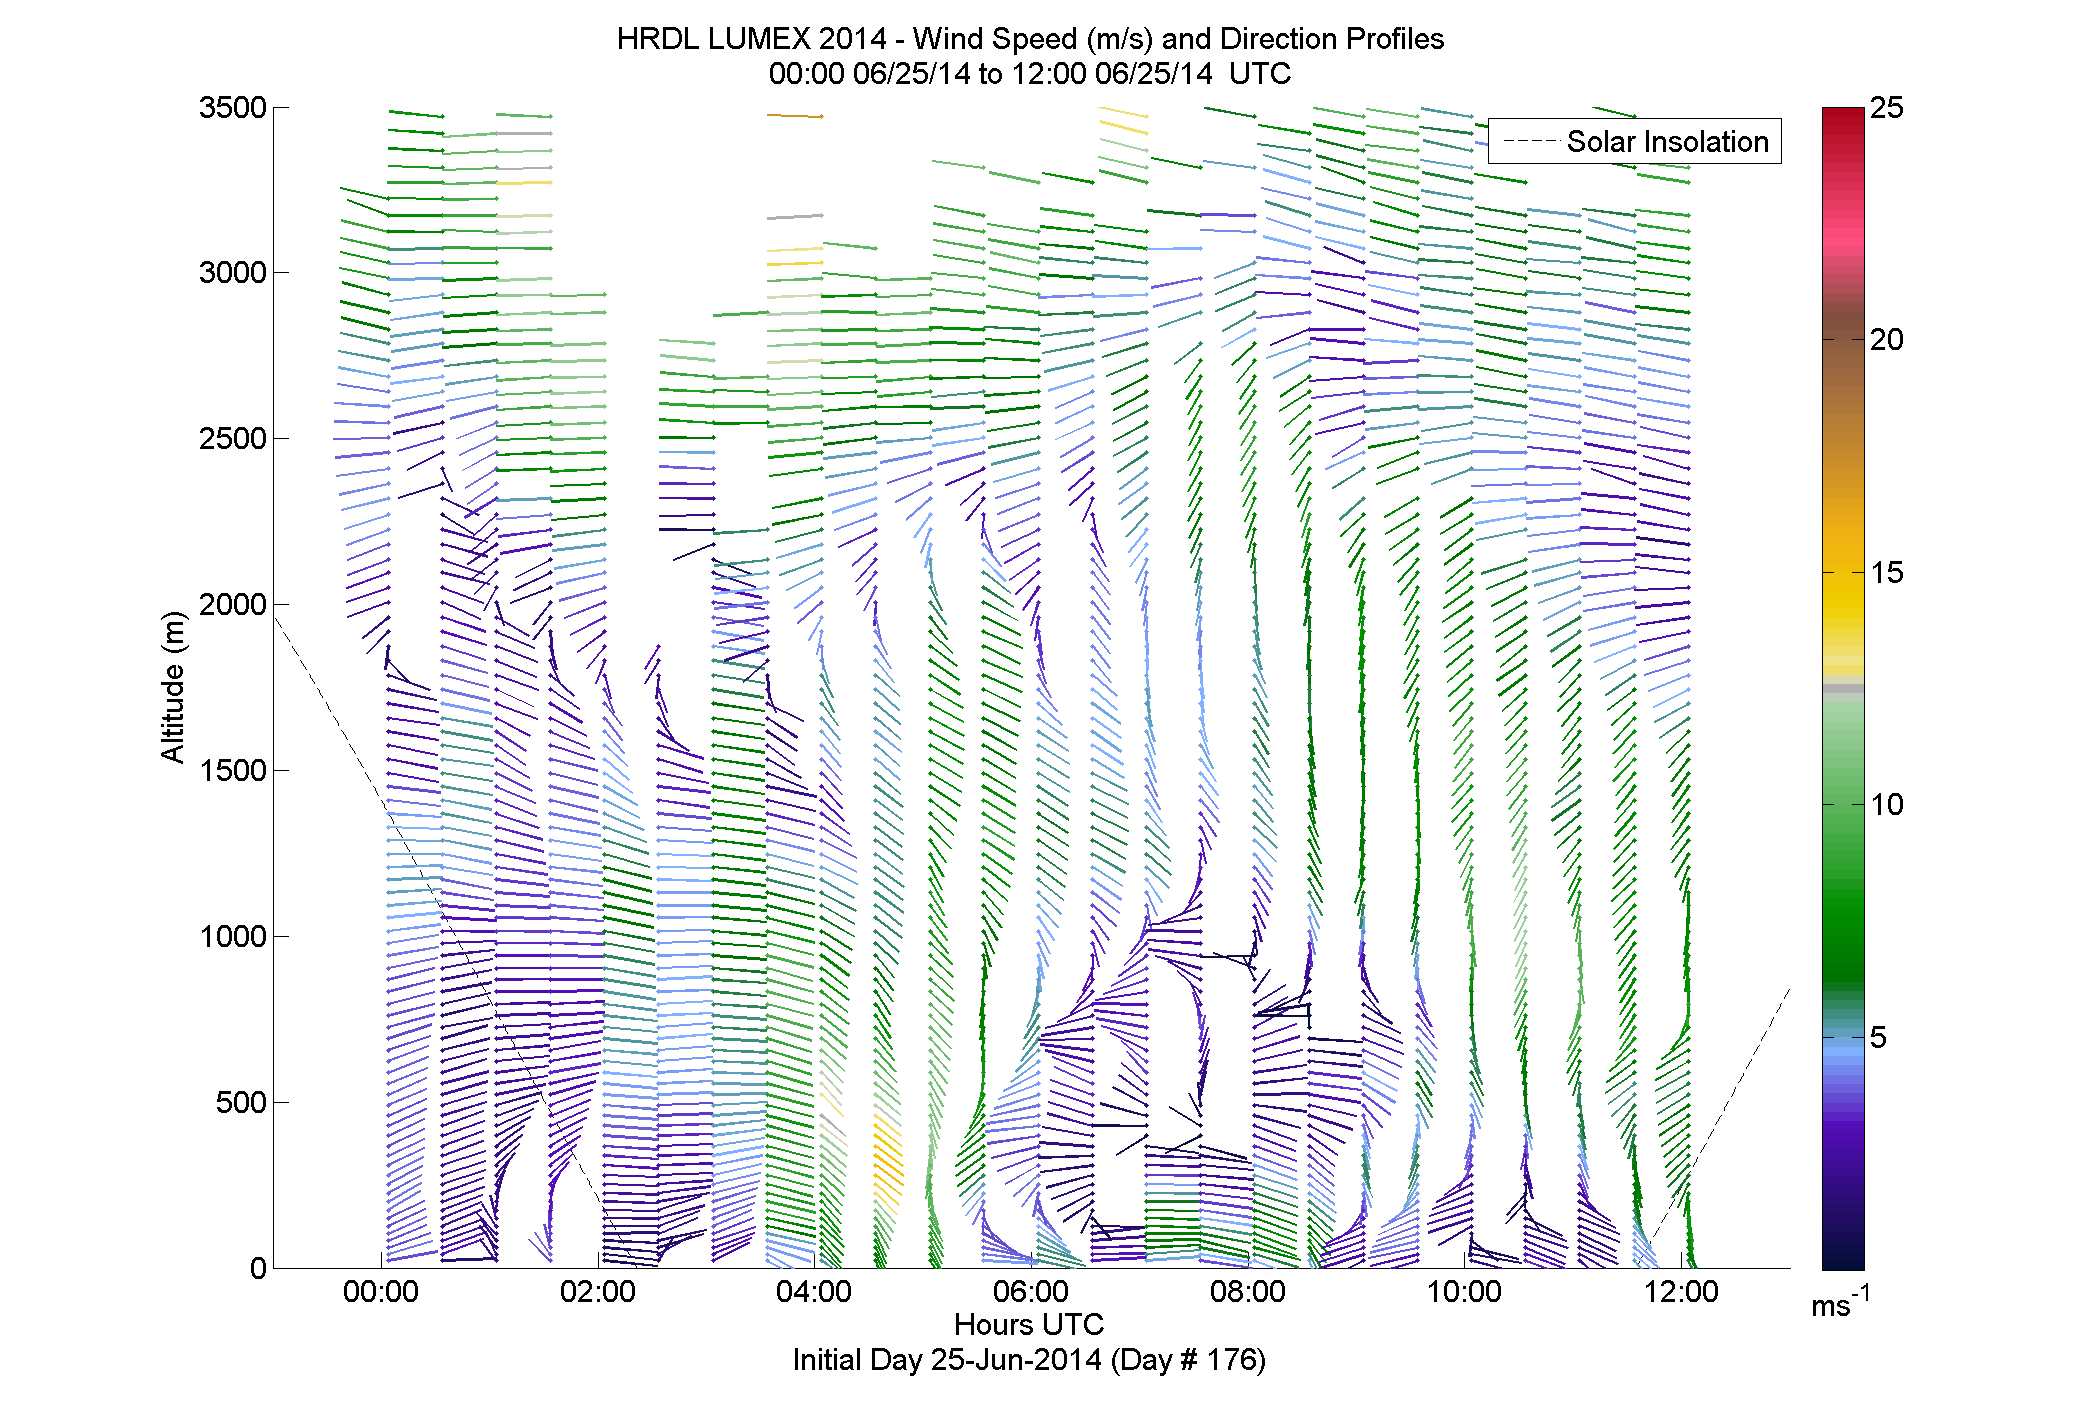 HRDL speed and direction profile - June 25 am